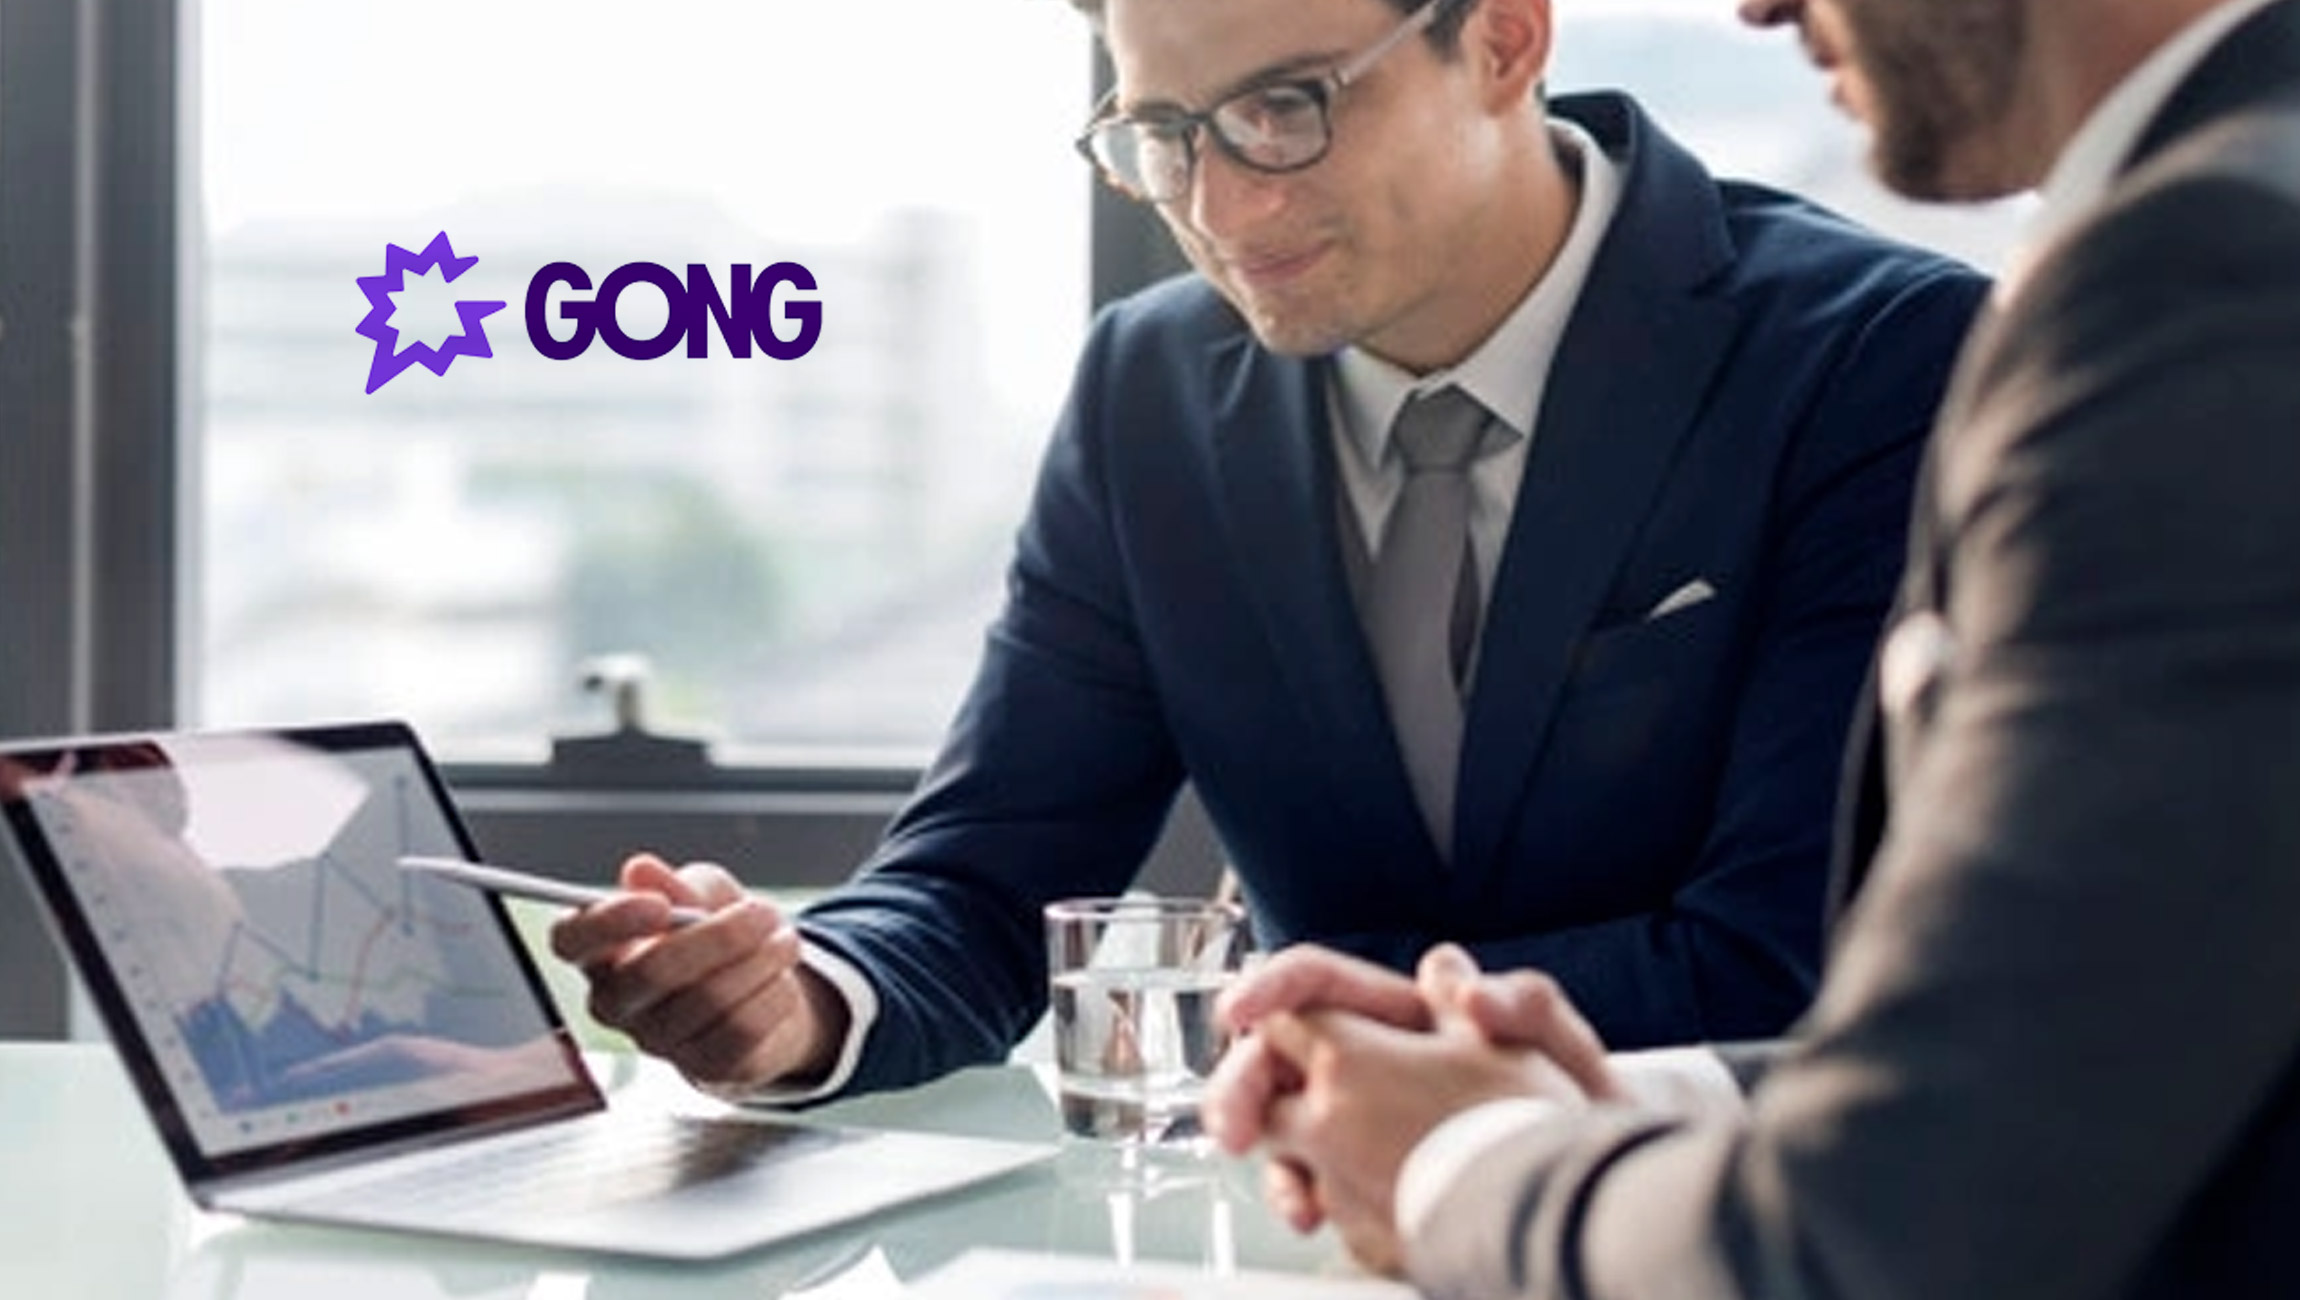 Gong Named A Leader In Revenue Operations And Intelligence, According To Independent Analyst Firm